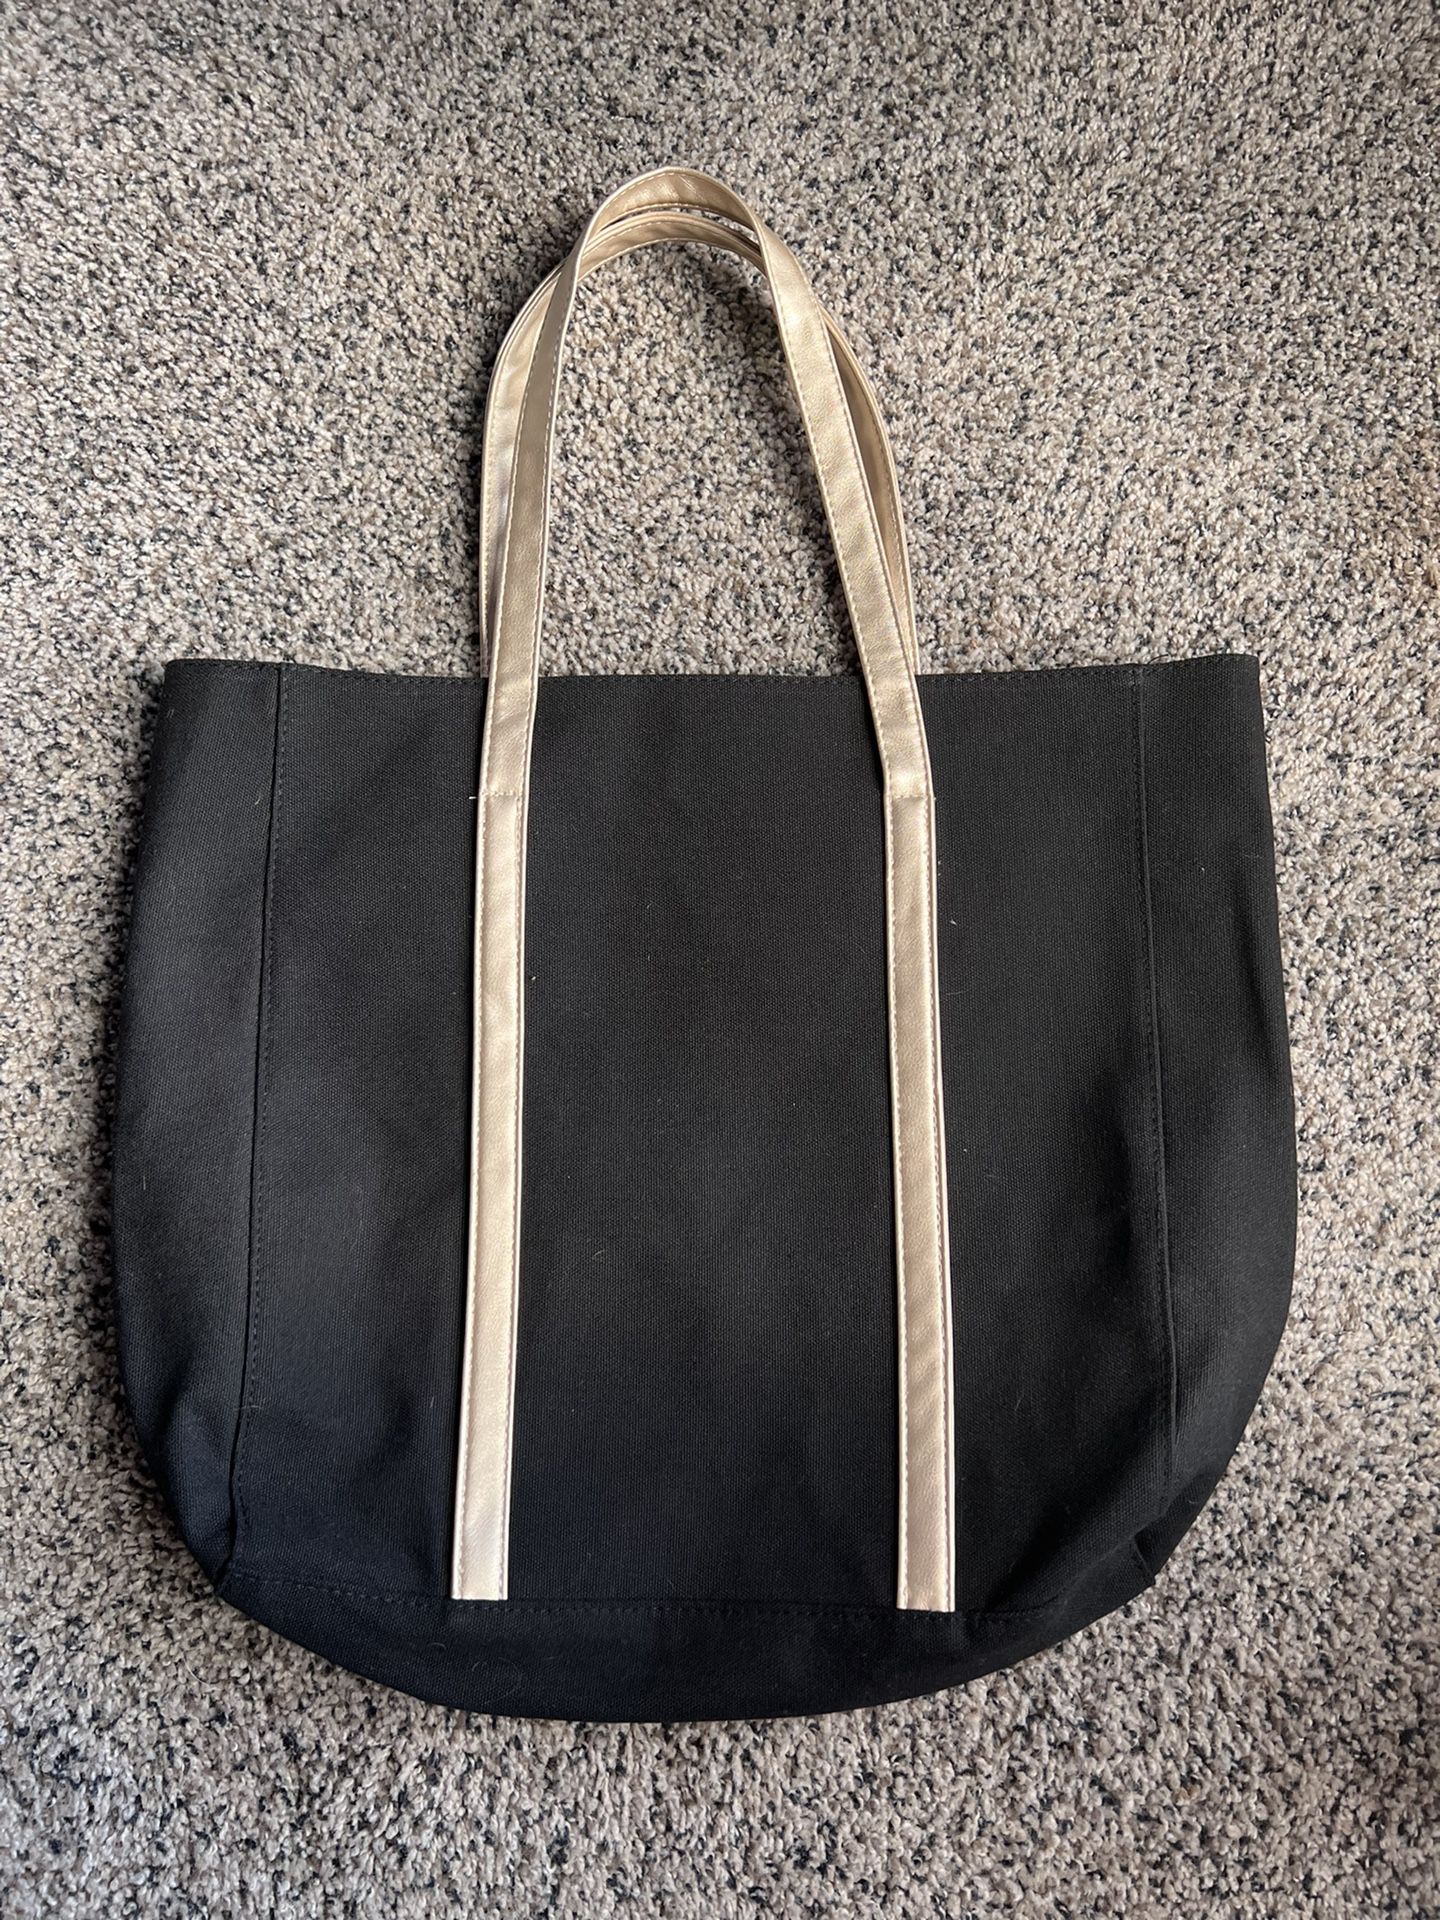 Perfect Marc Jacobs tote